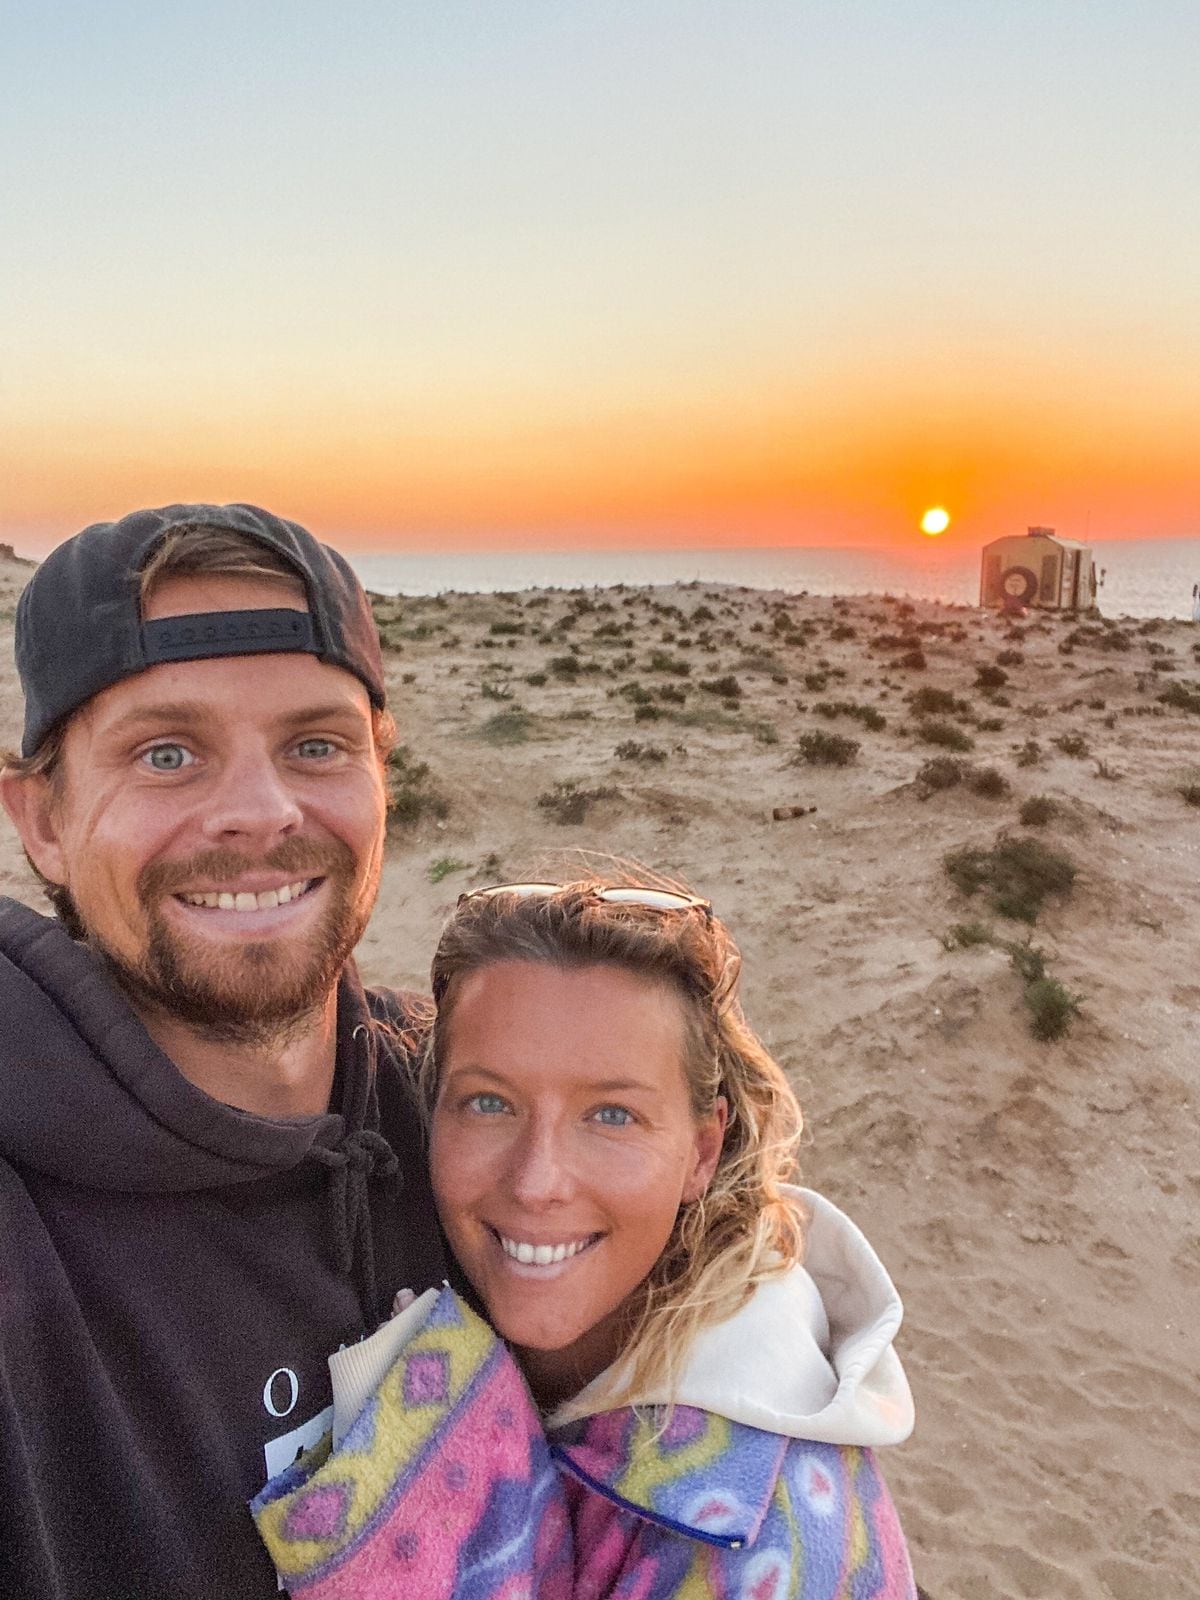 Lara Baudains has raised more than £500 for an animal charity in Morocco while travelling with her fiance Charlie Skinner. (31700949)